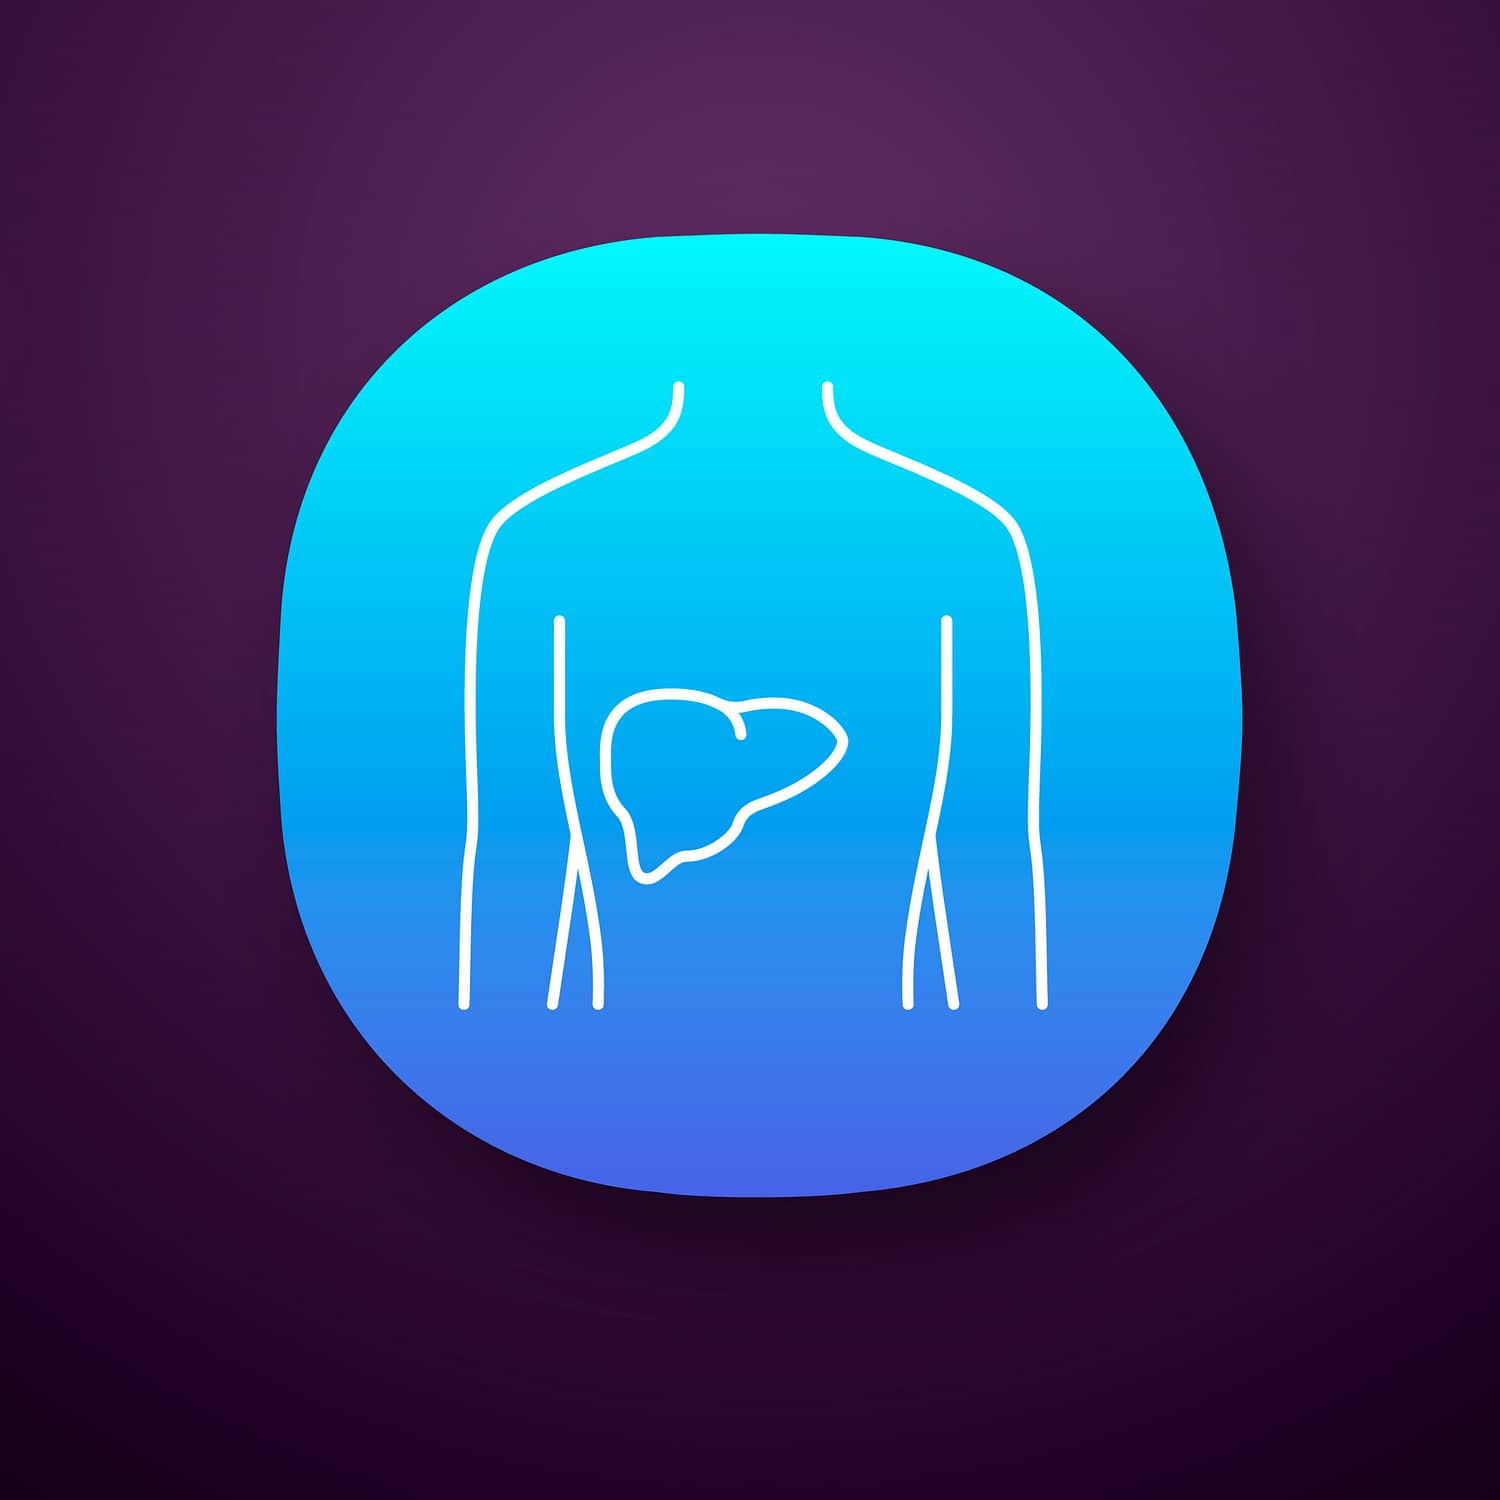 Healthy liver app icon. Human organ in good health. Functioning digestive gland. Wholesome gastrointestinal tract. UI/UX user interface. Web or mobile application. Vector isolated illustration